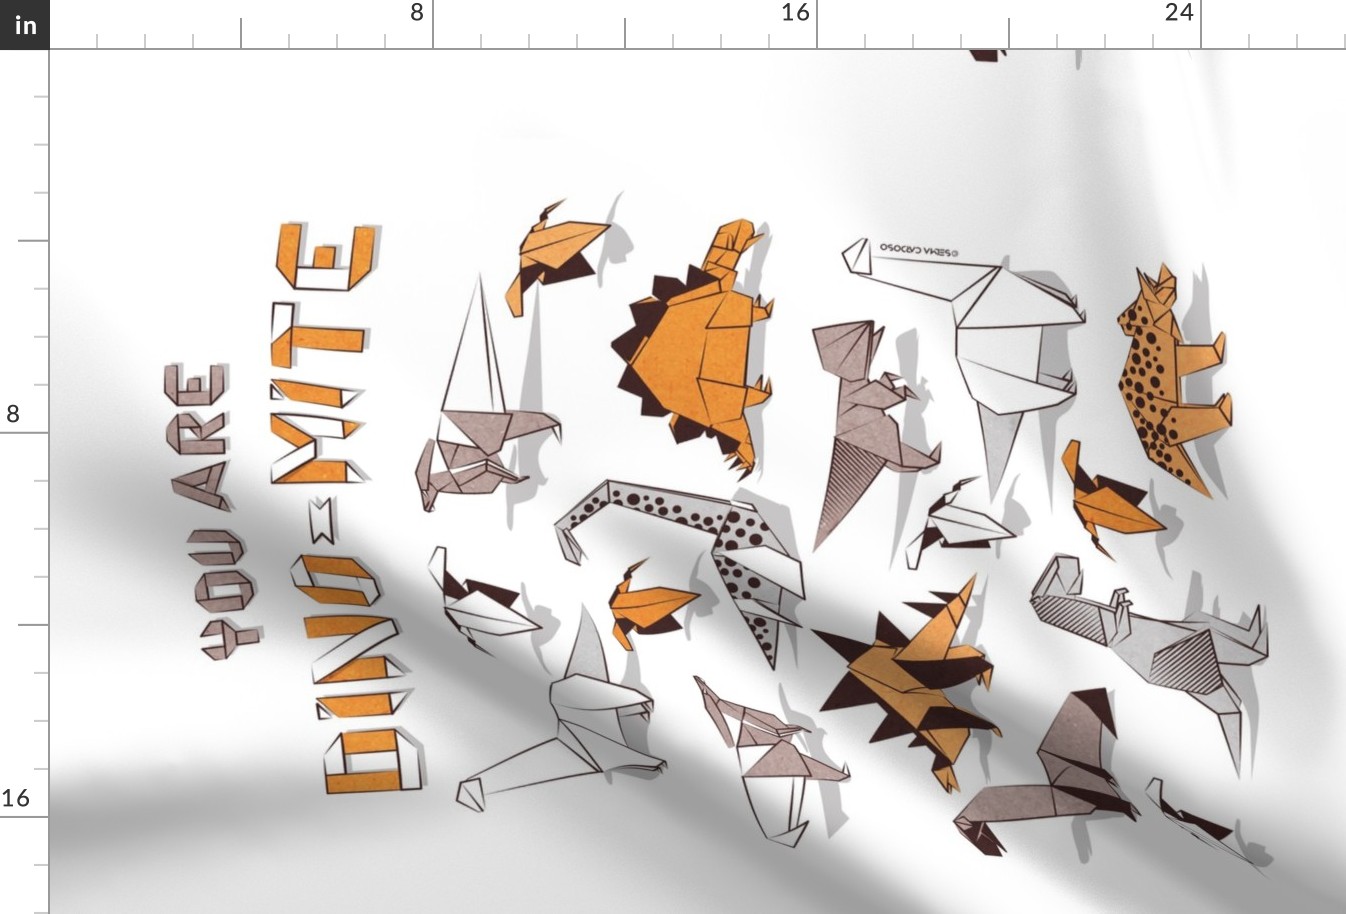 You are dino-mite punderful quote TEA TOWEL // white background paper orange grey and white origami dinosaurs 